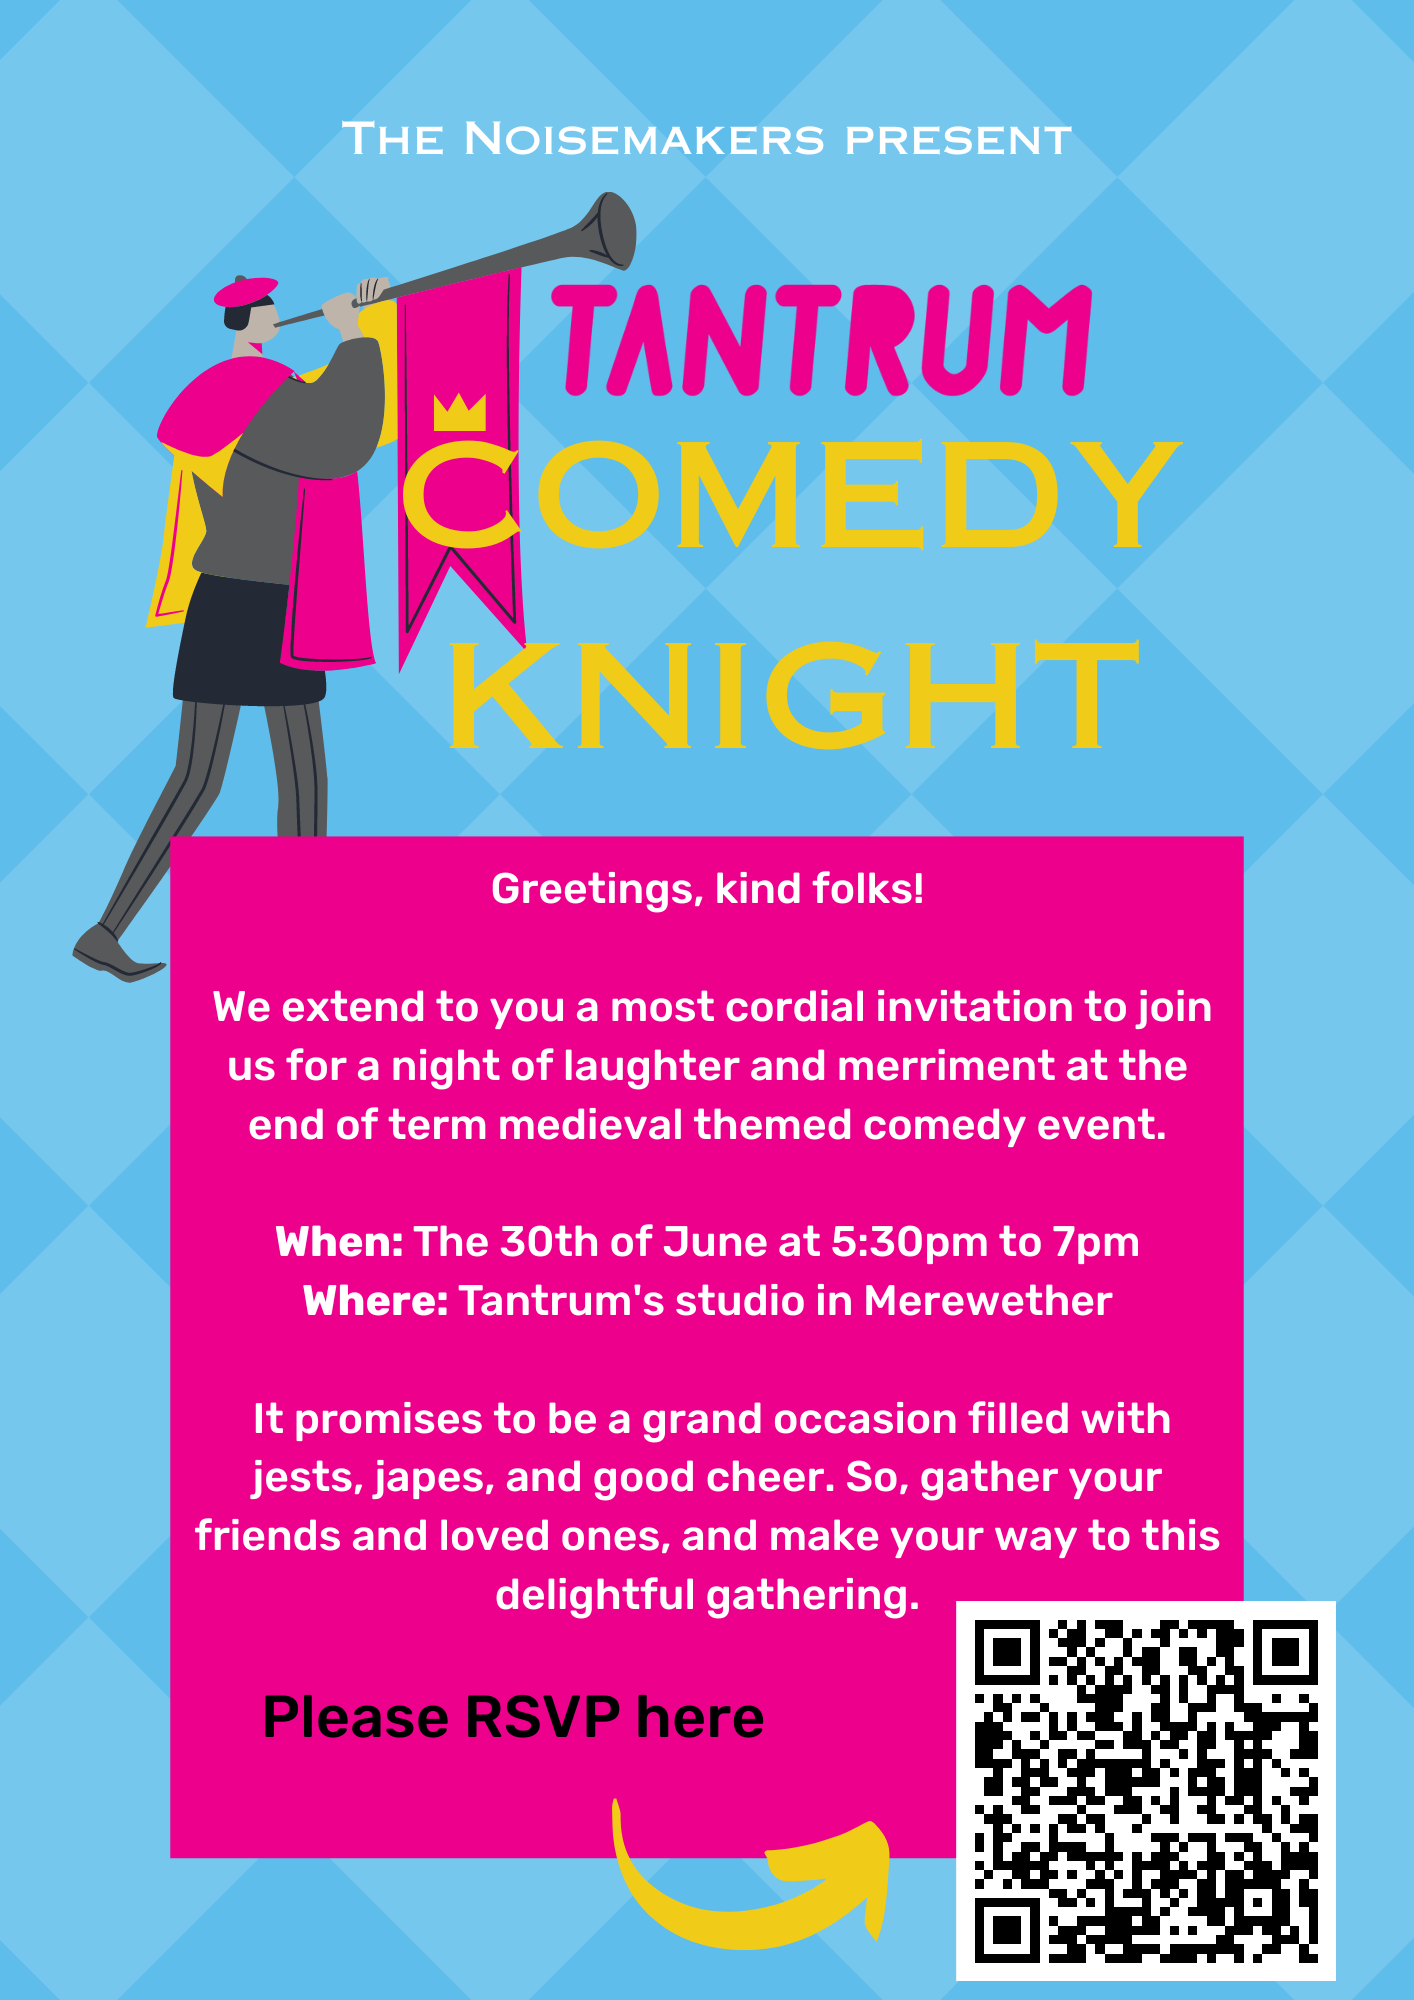 Comedy Knight. Greetings, kind folks! We extend to you a most cordial invitation to join us for a night of laughter and merriment at the end of term medieval themed comedy event. When: The 30th of June at 5:30pm to 7pm Where: Tantrum's studio in Merewether It promises to be a grand occasion filled with jests, japes, and good cheer. So, gather your friends and loved ones, and make your way to this delightful gathering.